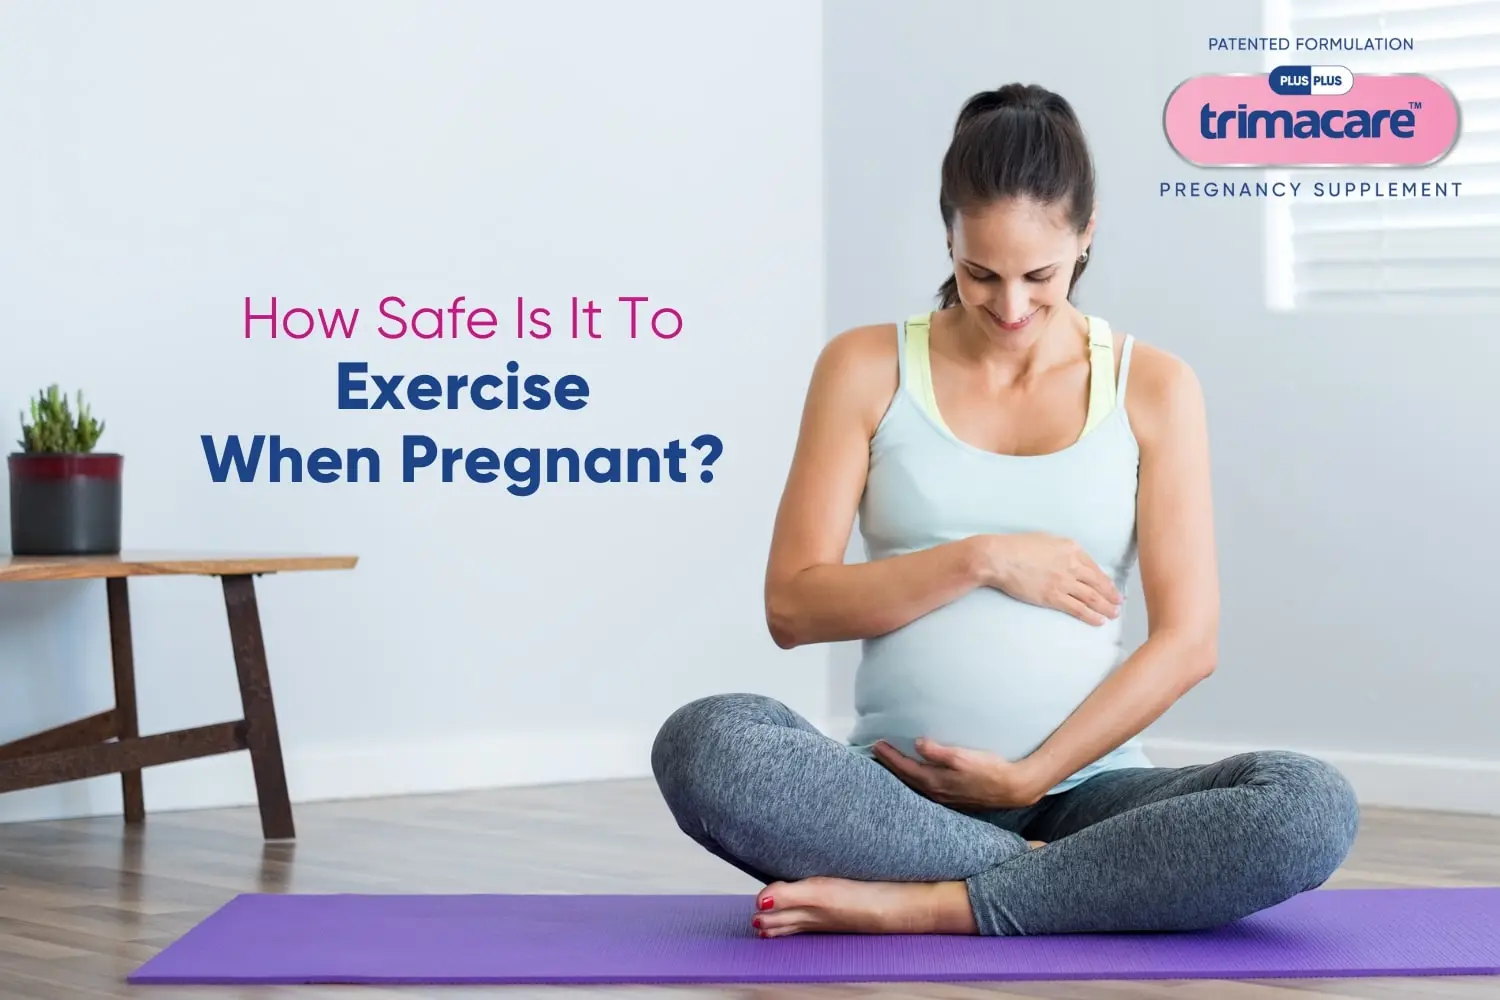 IS IT SAFE TO EXERCISE DURING PREGNANCY